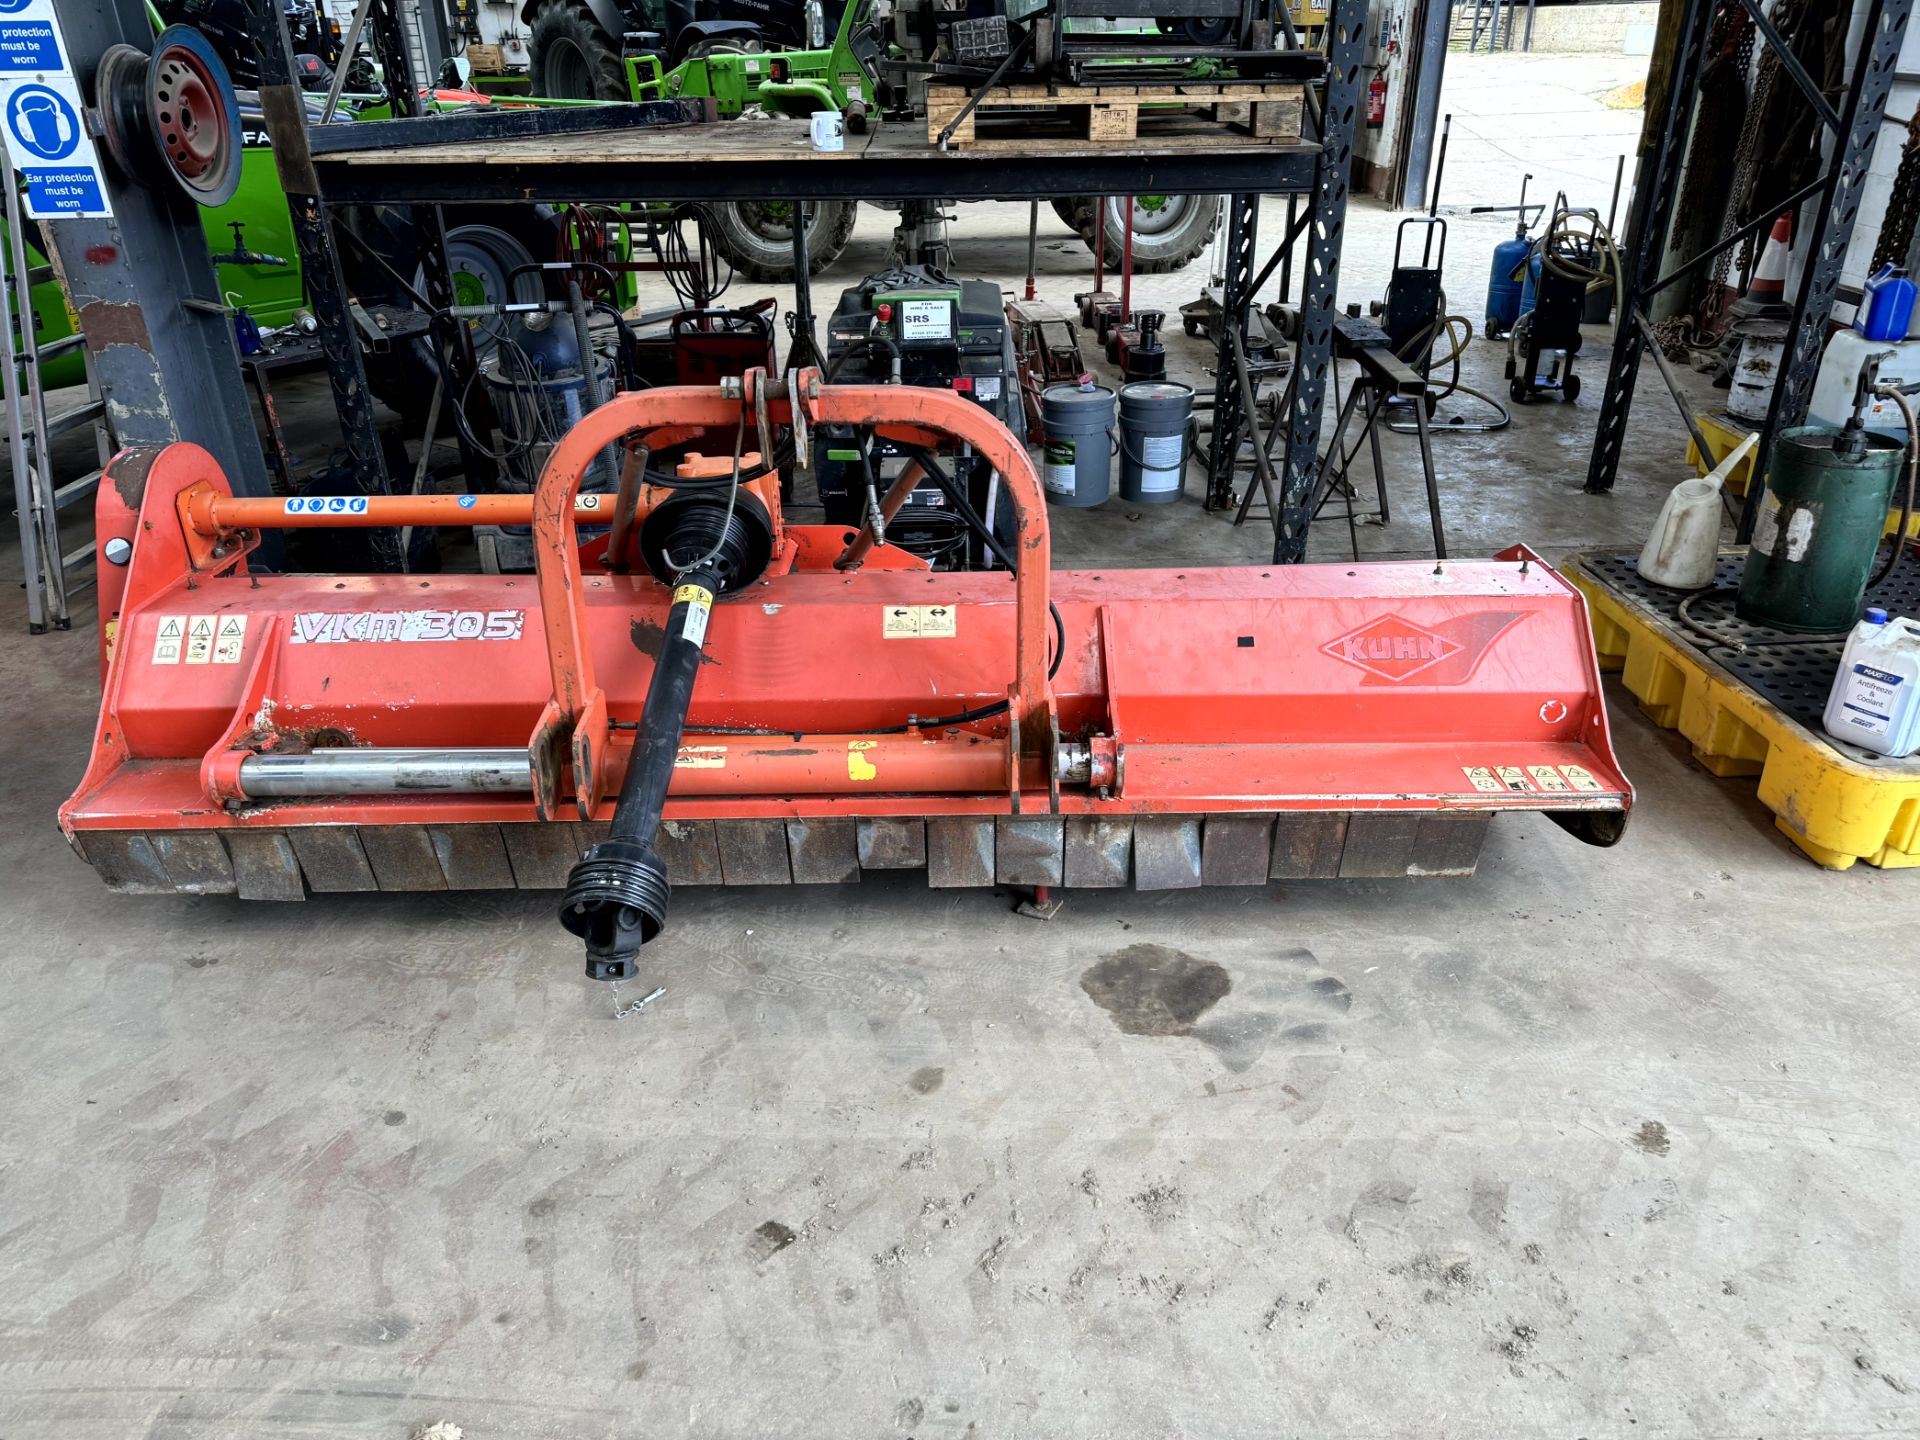 1: Kuhn VKM305, Flail Mower. (No Plate)